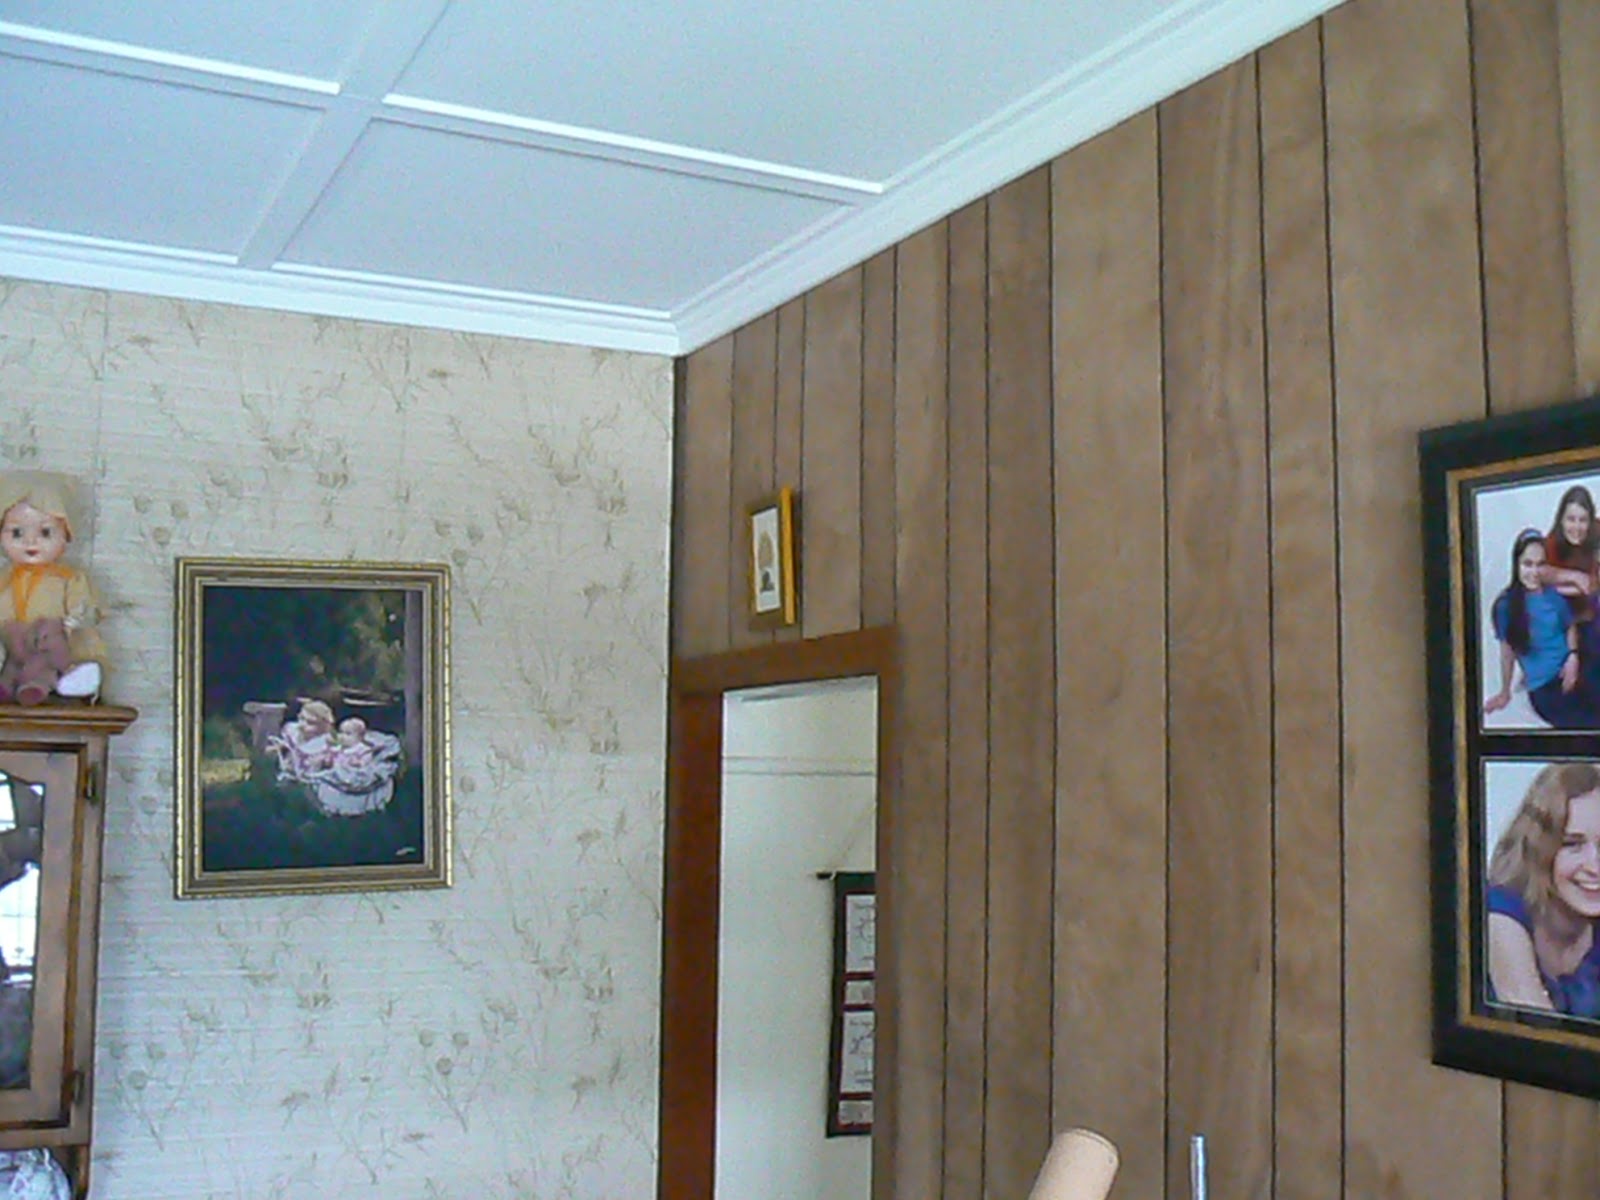 ... pic to show where the wall paper and the timber panel feature meet